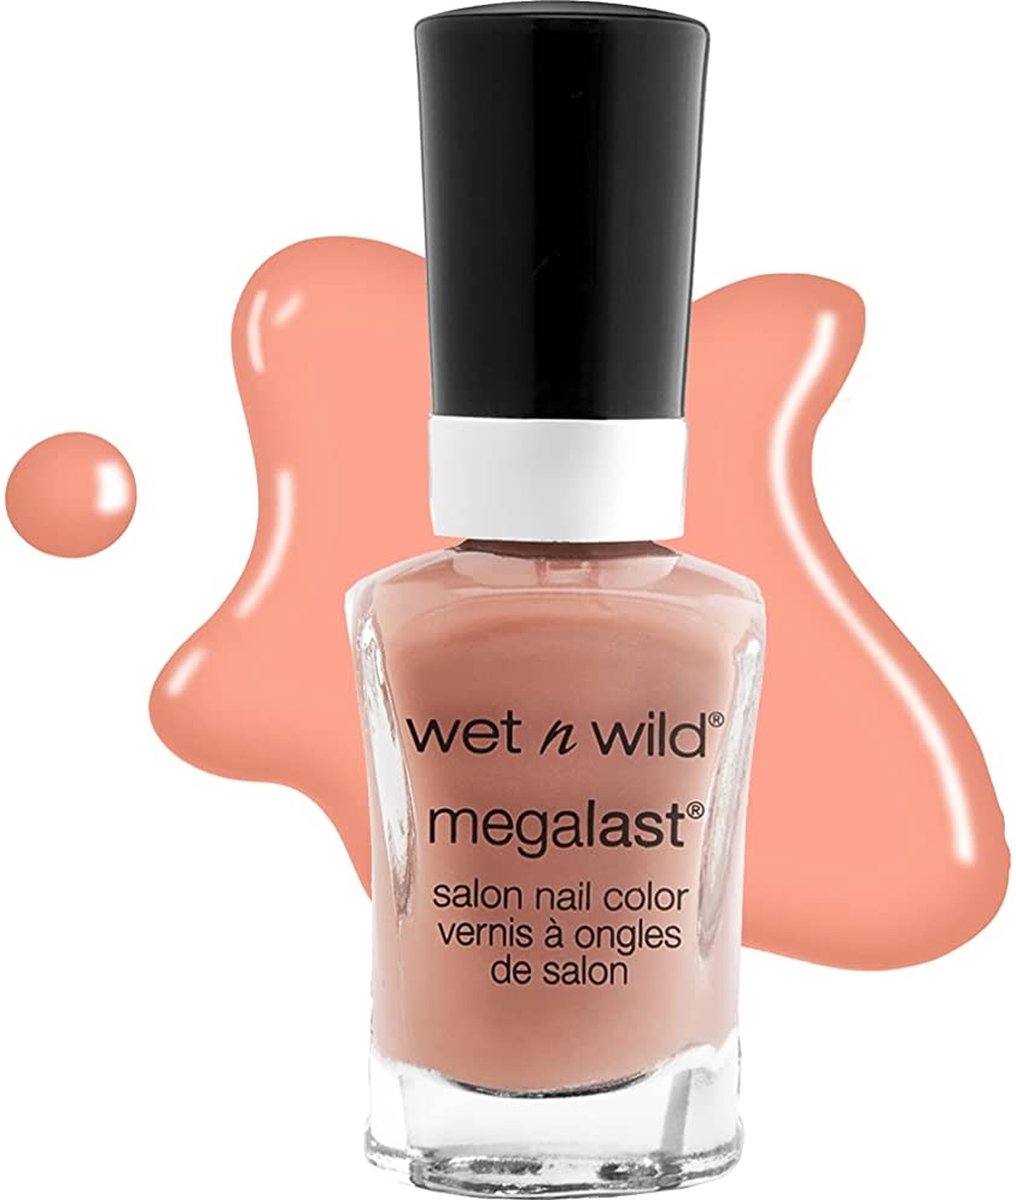 Wet 'n Wild MegaLast Salon Nail Color - 204B - Private Viewing - Nagellak - Nude - 13.5 ml